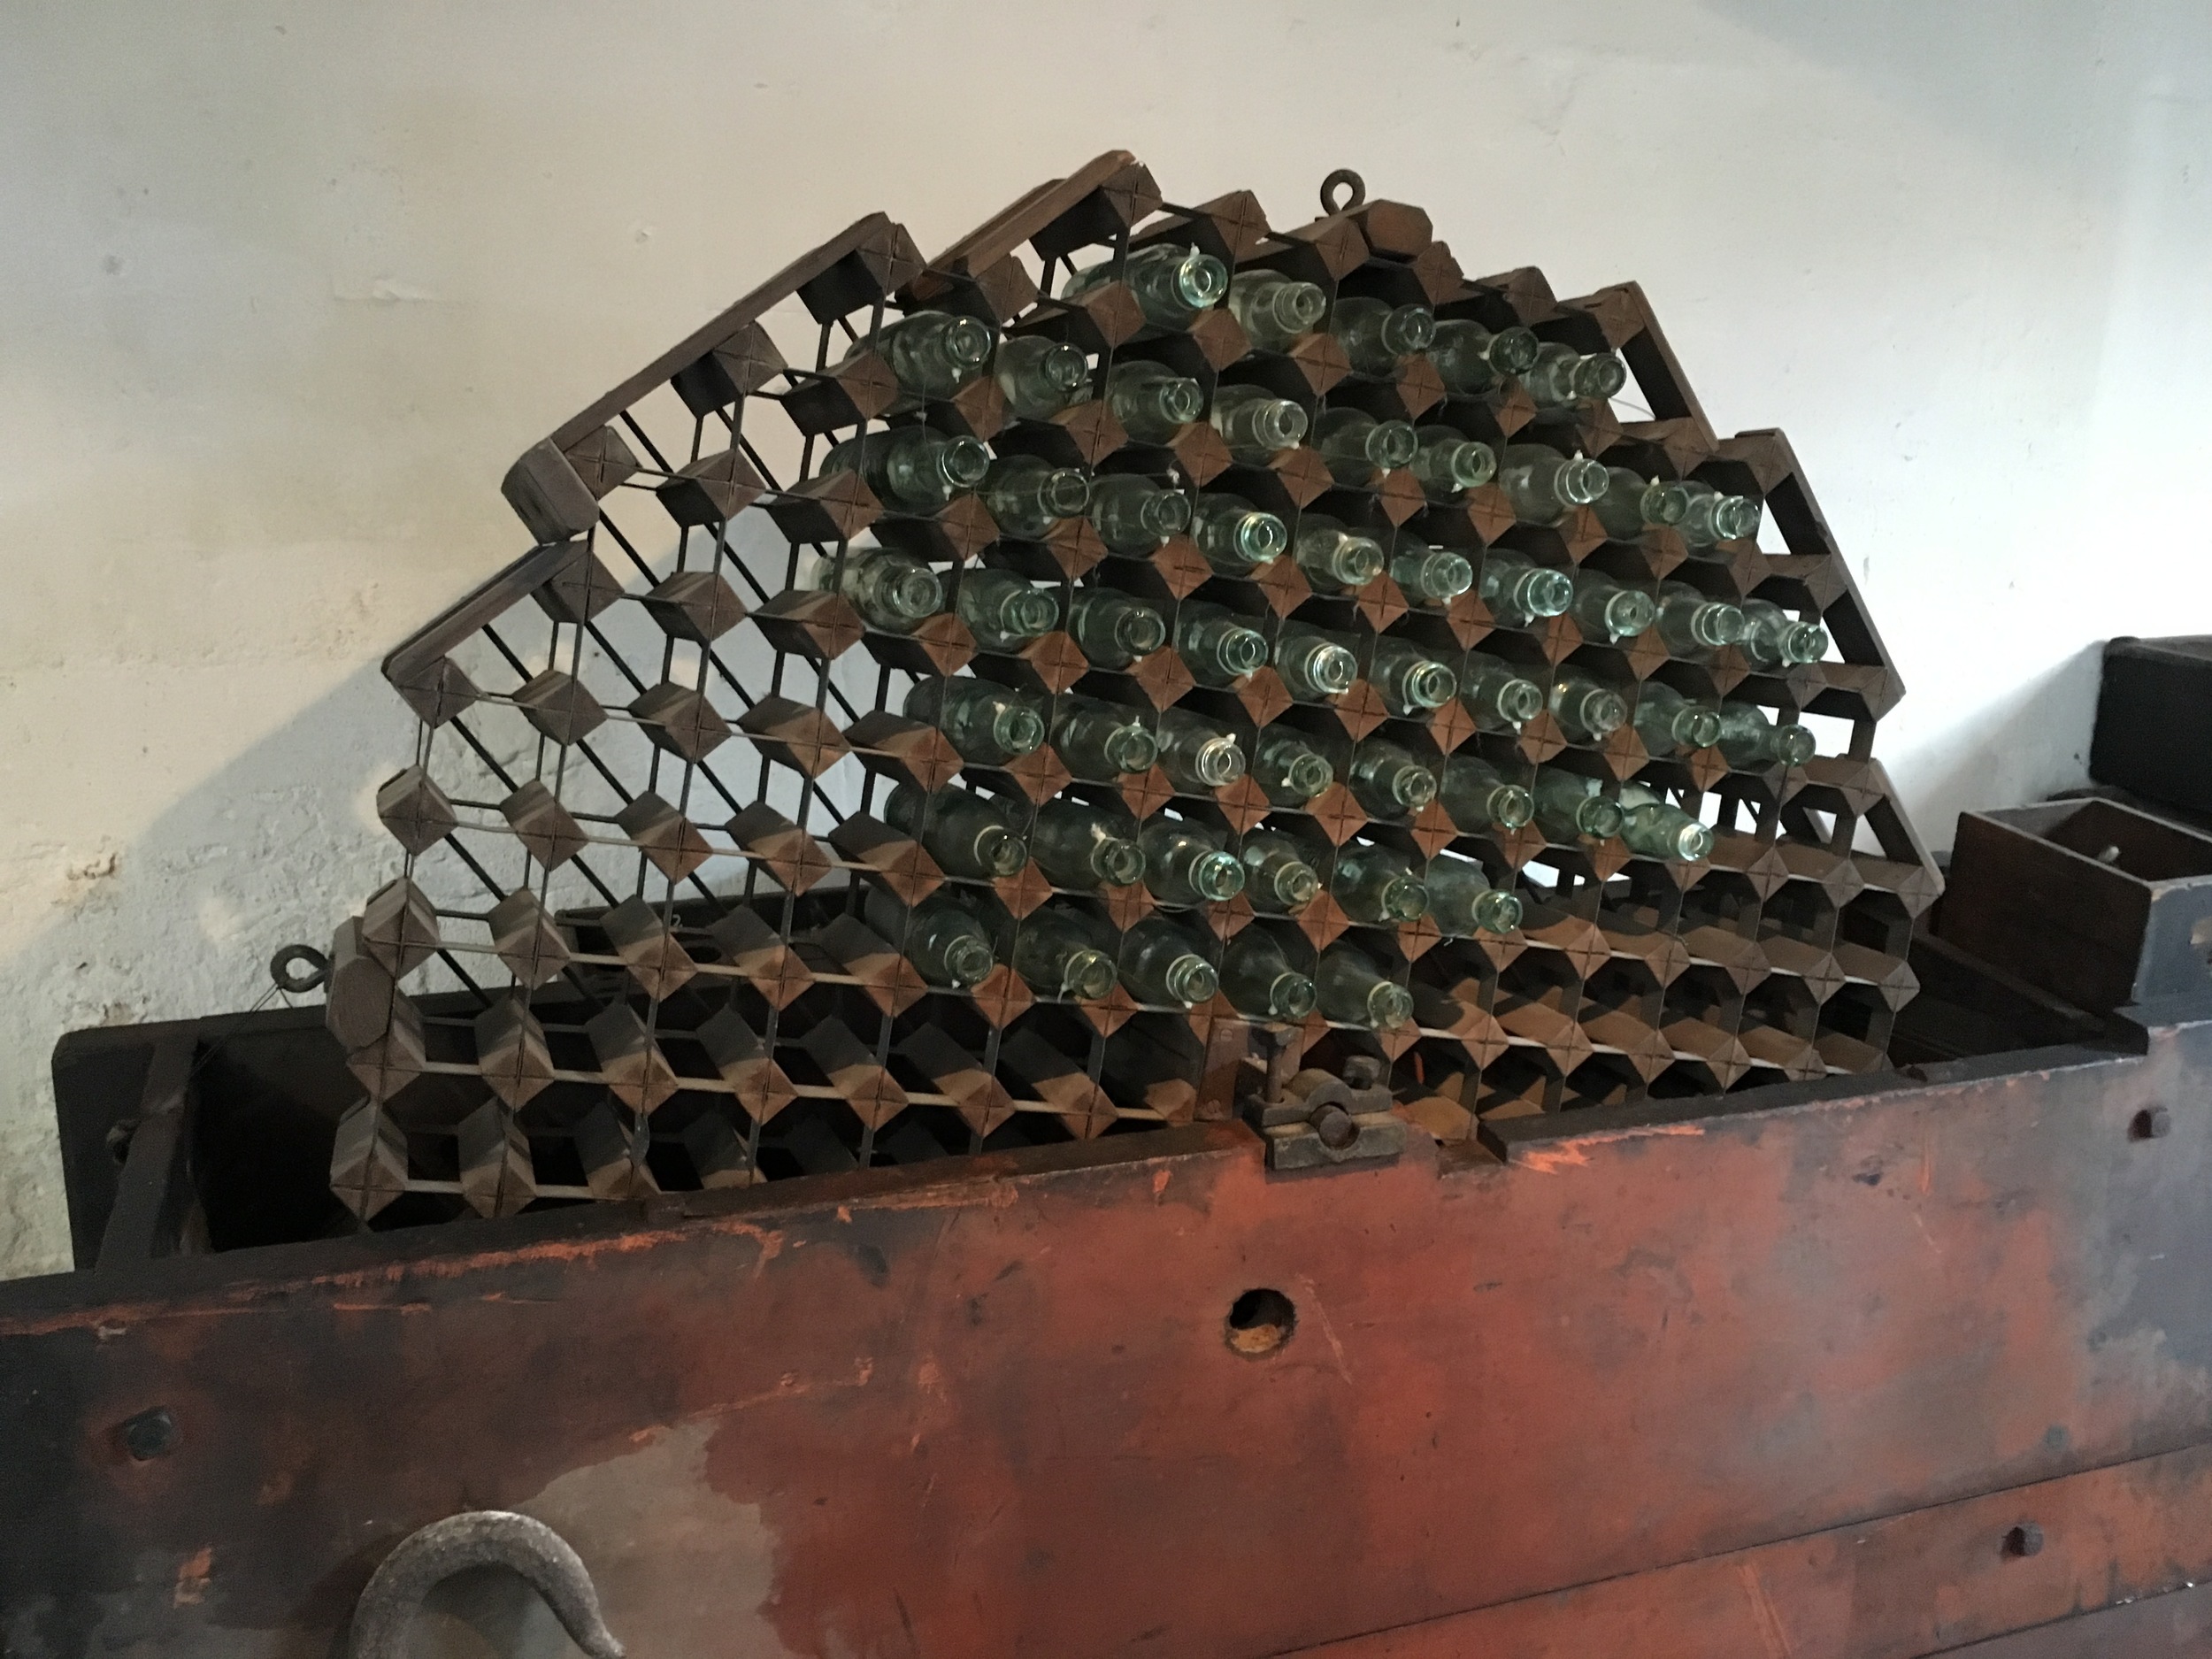  A bottle rotator used in a soda factoring in Bath (they would use the naturally occurring carbonated water from the nearby hot springs).&nbsp; 